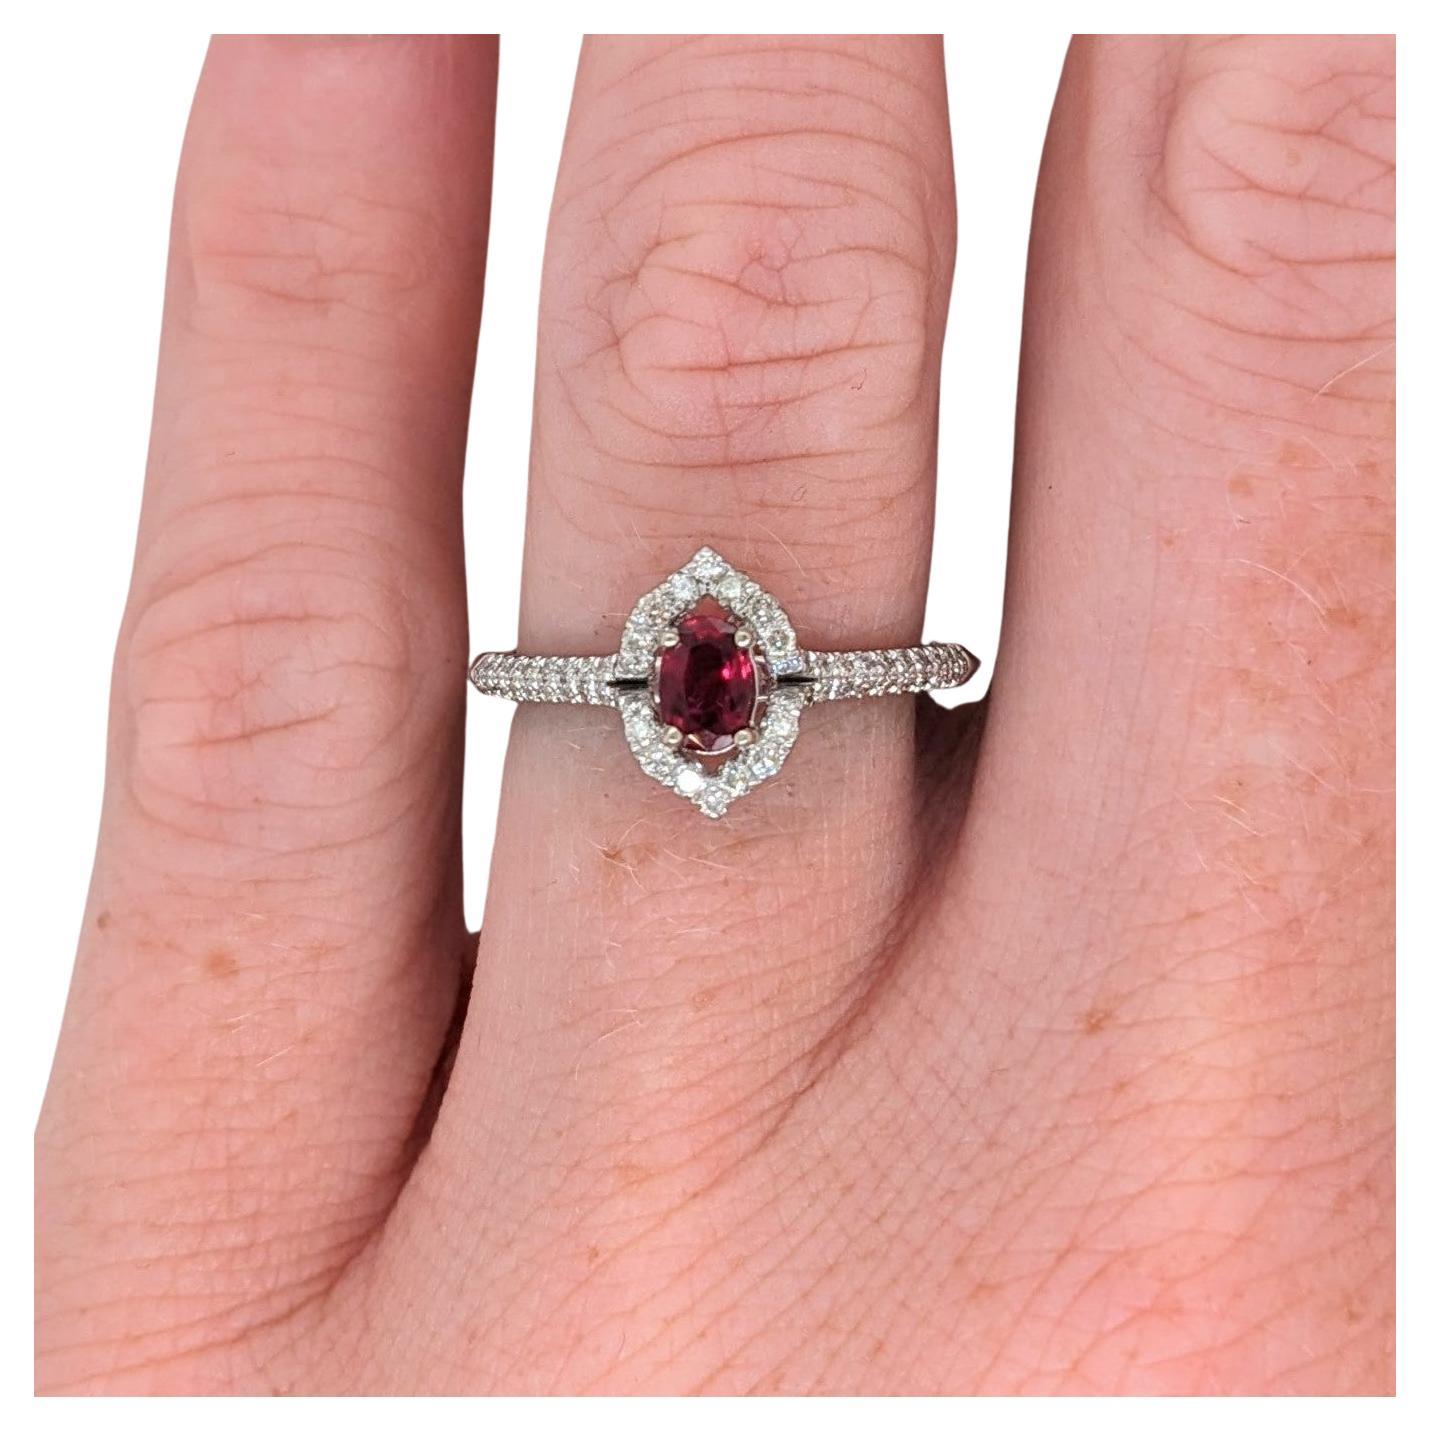 Modernist Vintage Inspired Ruby Ring w Diamond Halo in 14K White Gold Oval 5x3.5mm